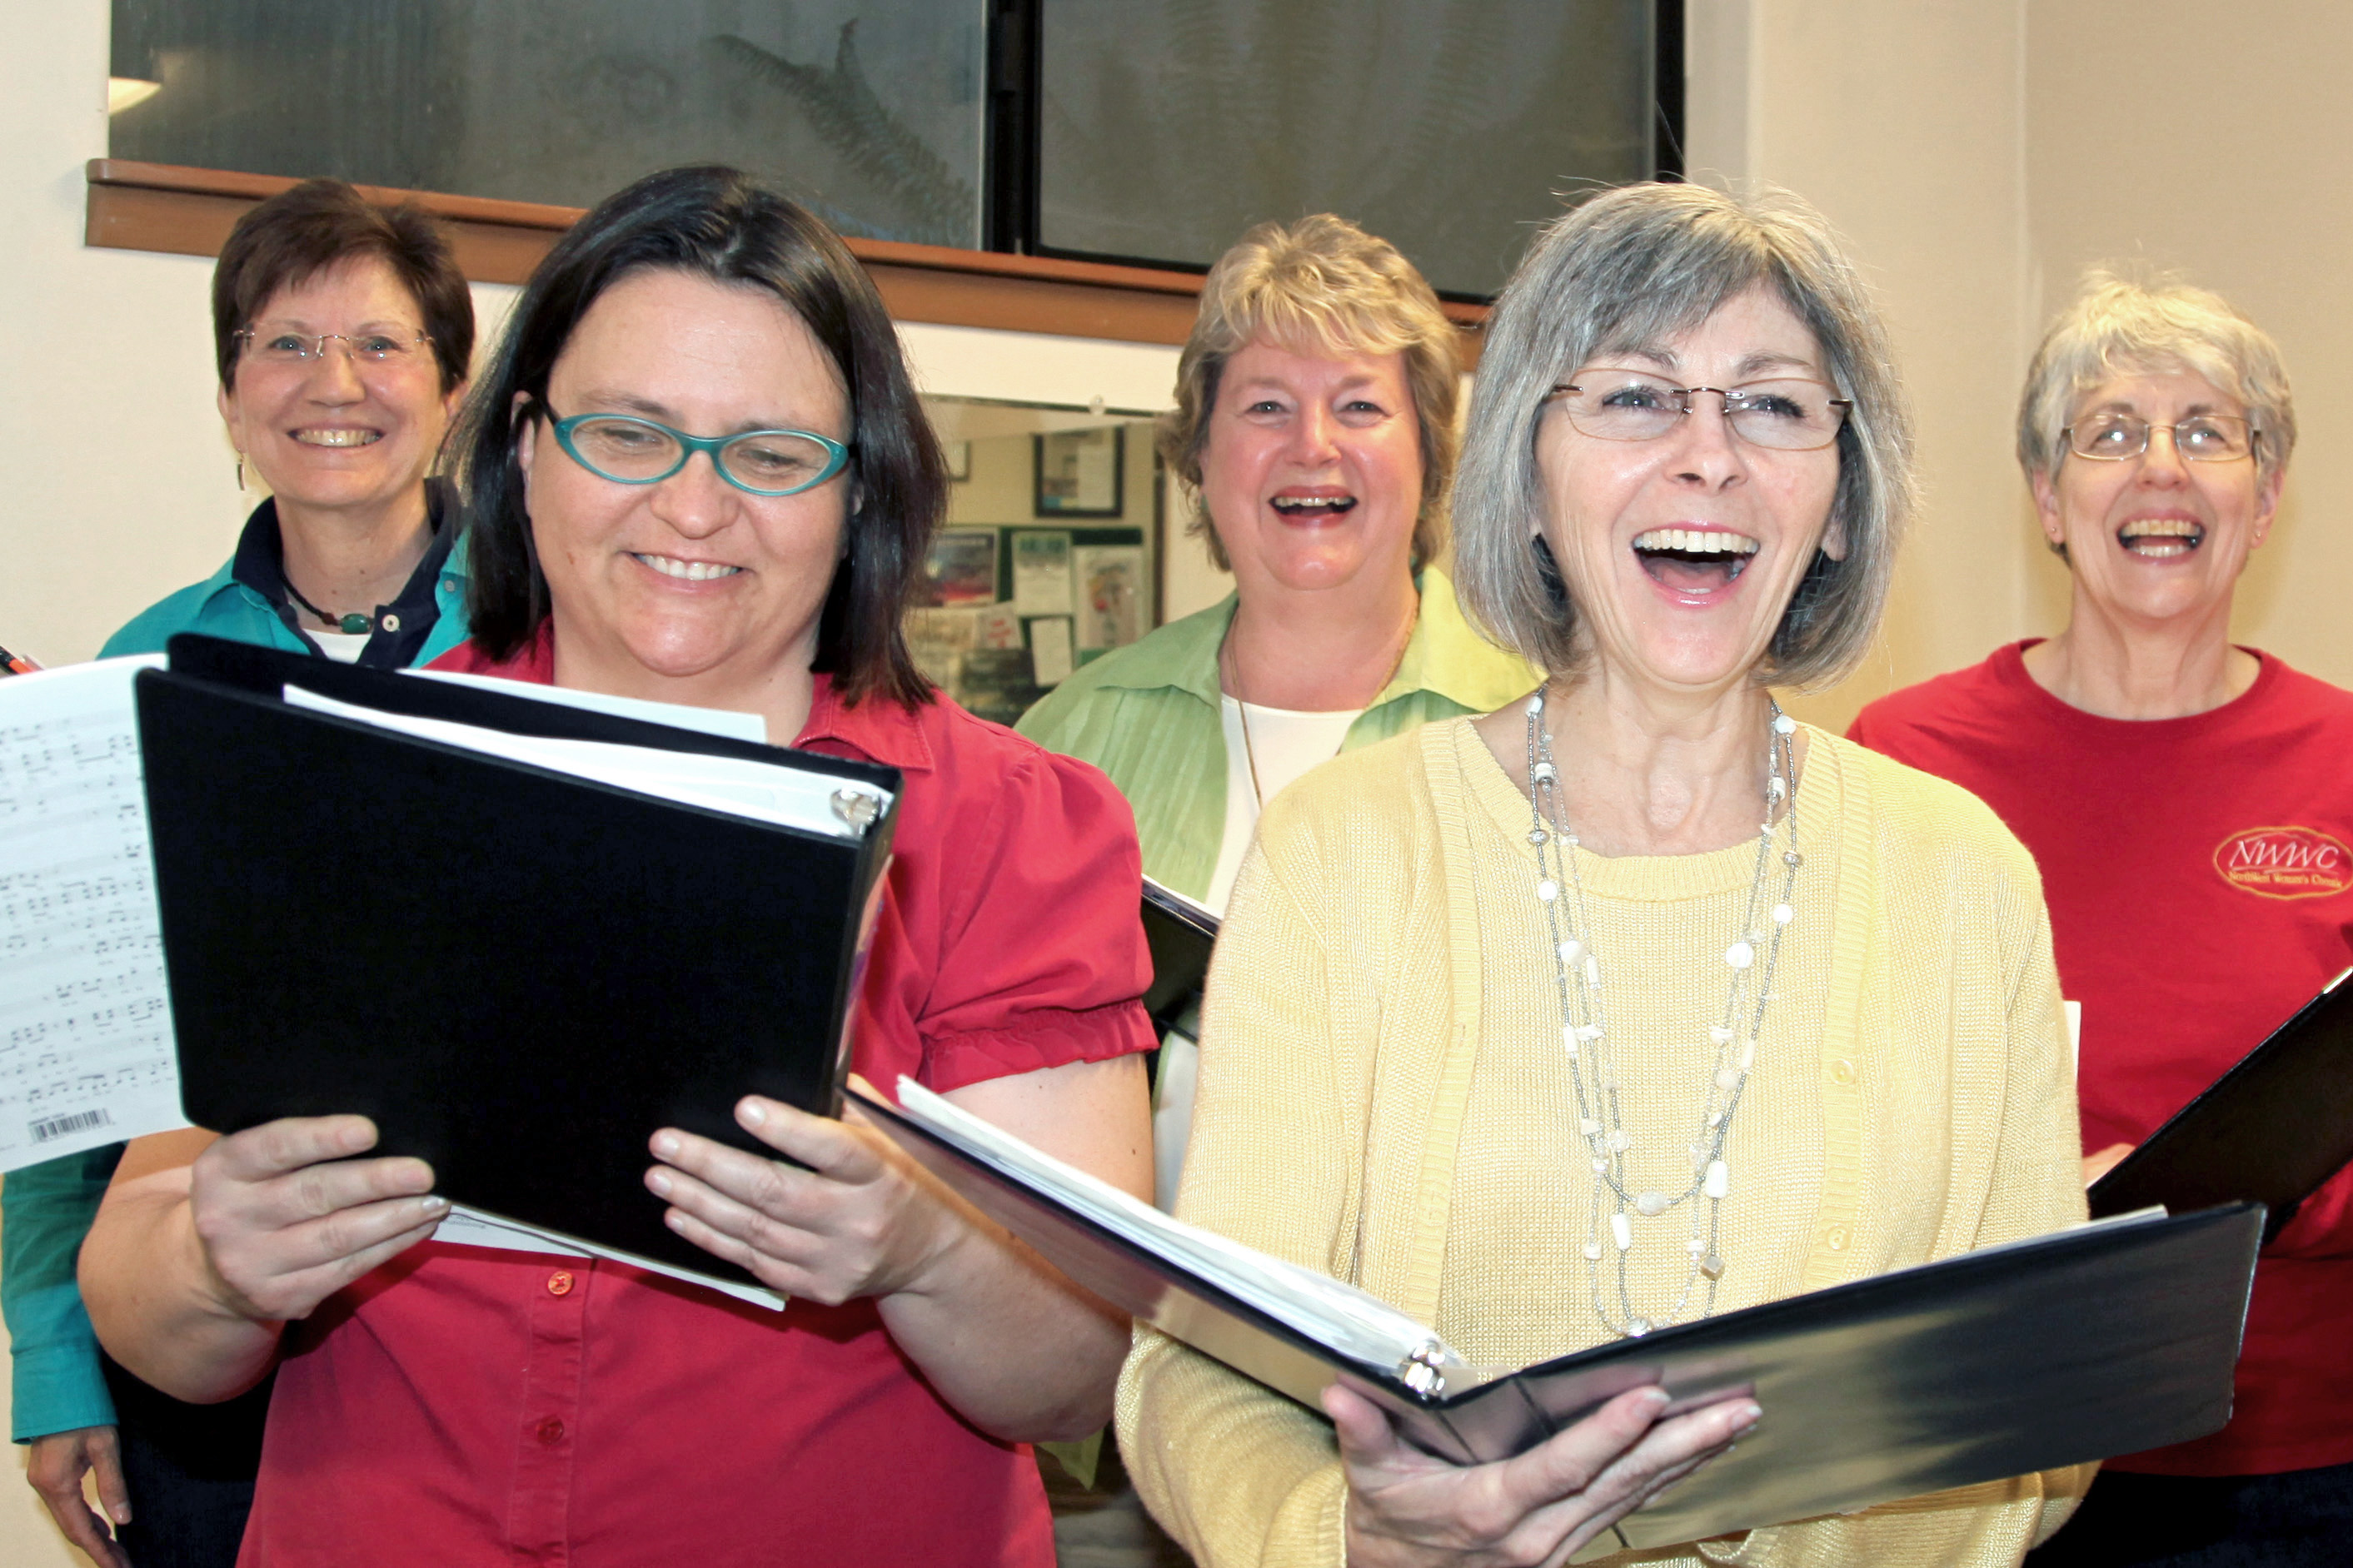 The NorthWest Women's Chorale at this evening will present their spring concert